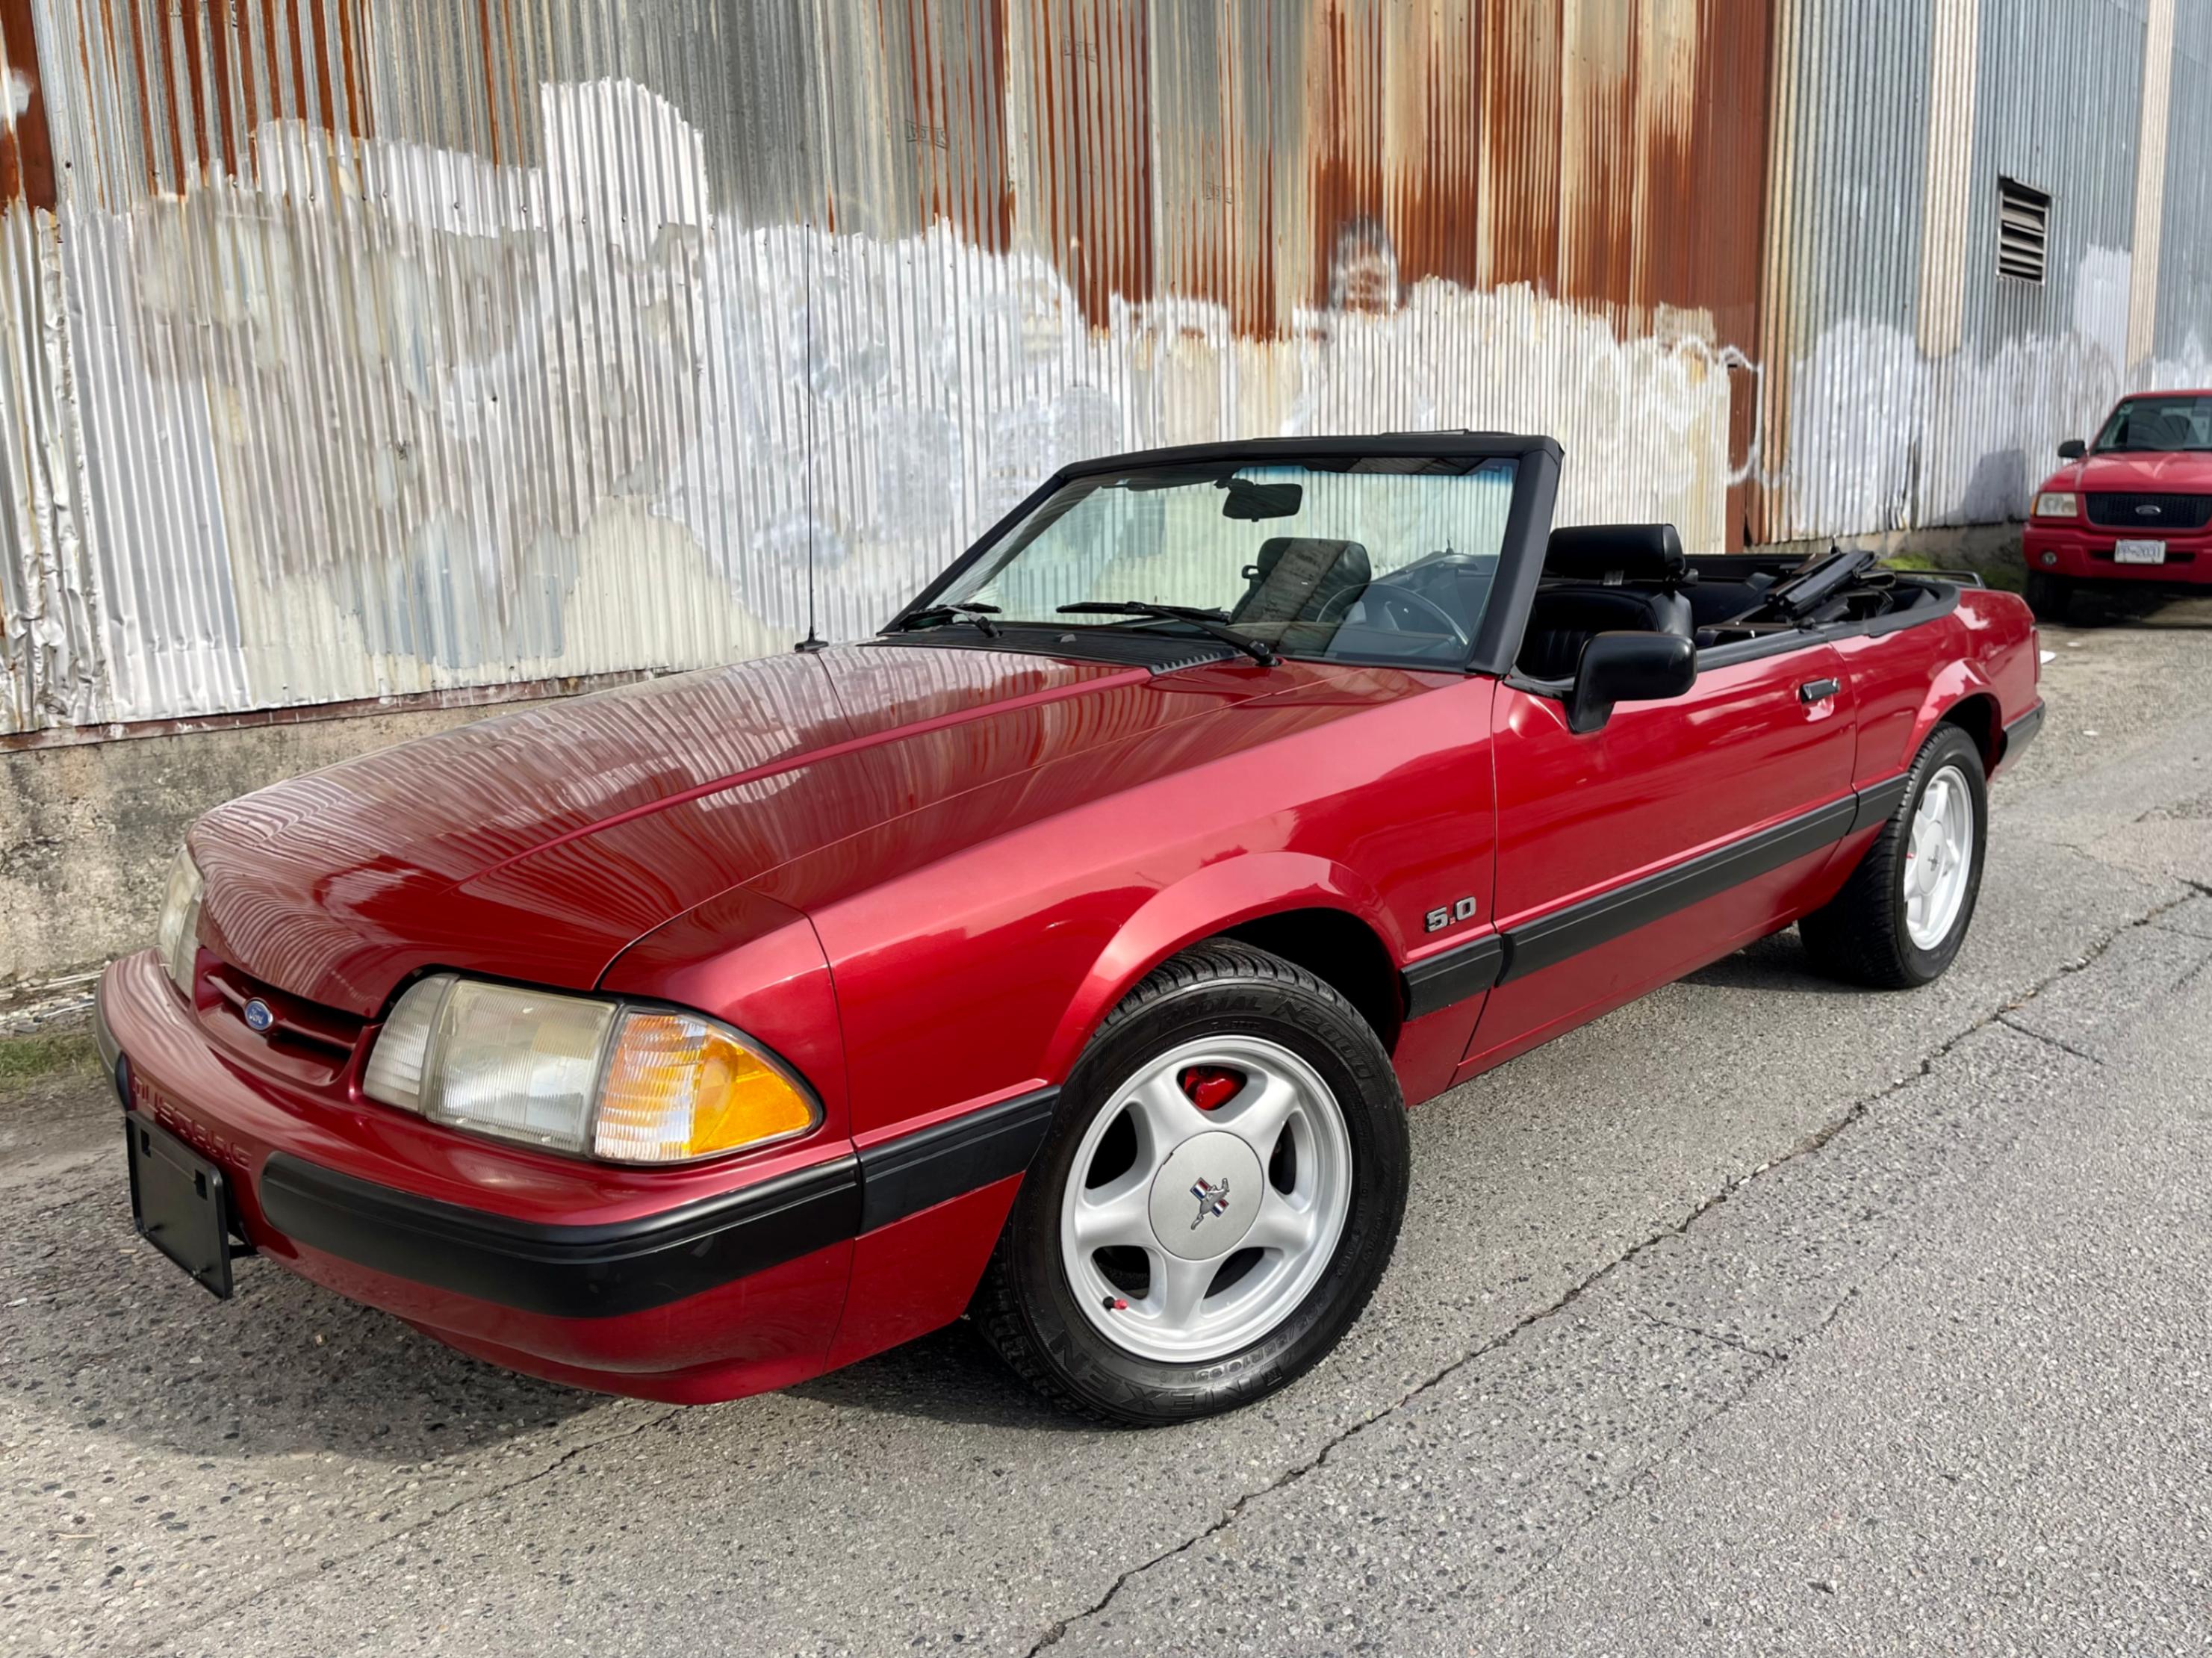 1991 Ford Mustang 2dr Convertible LX 5.0L